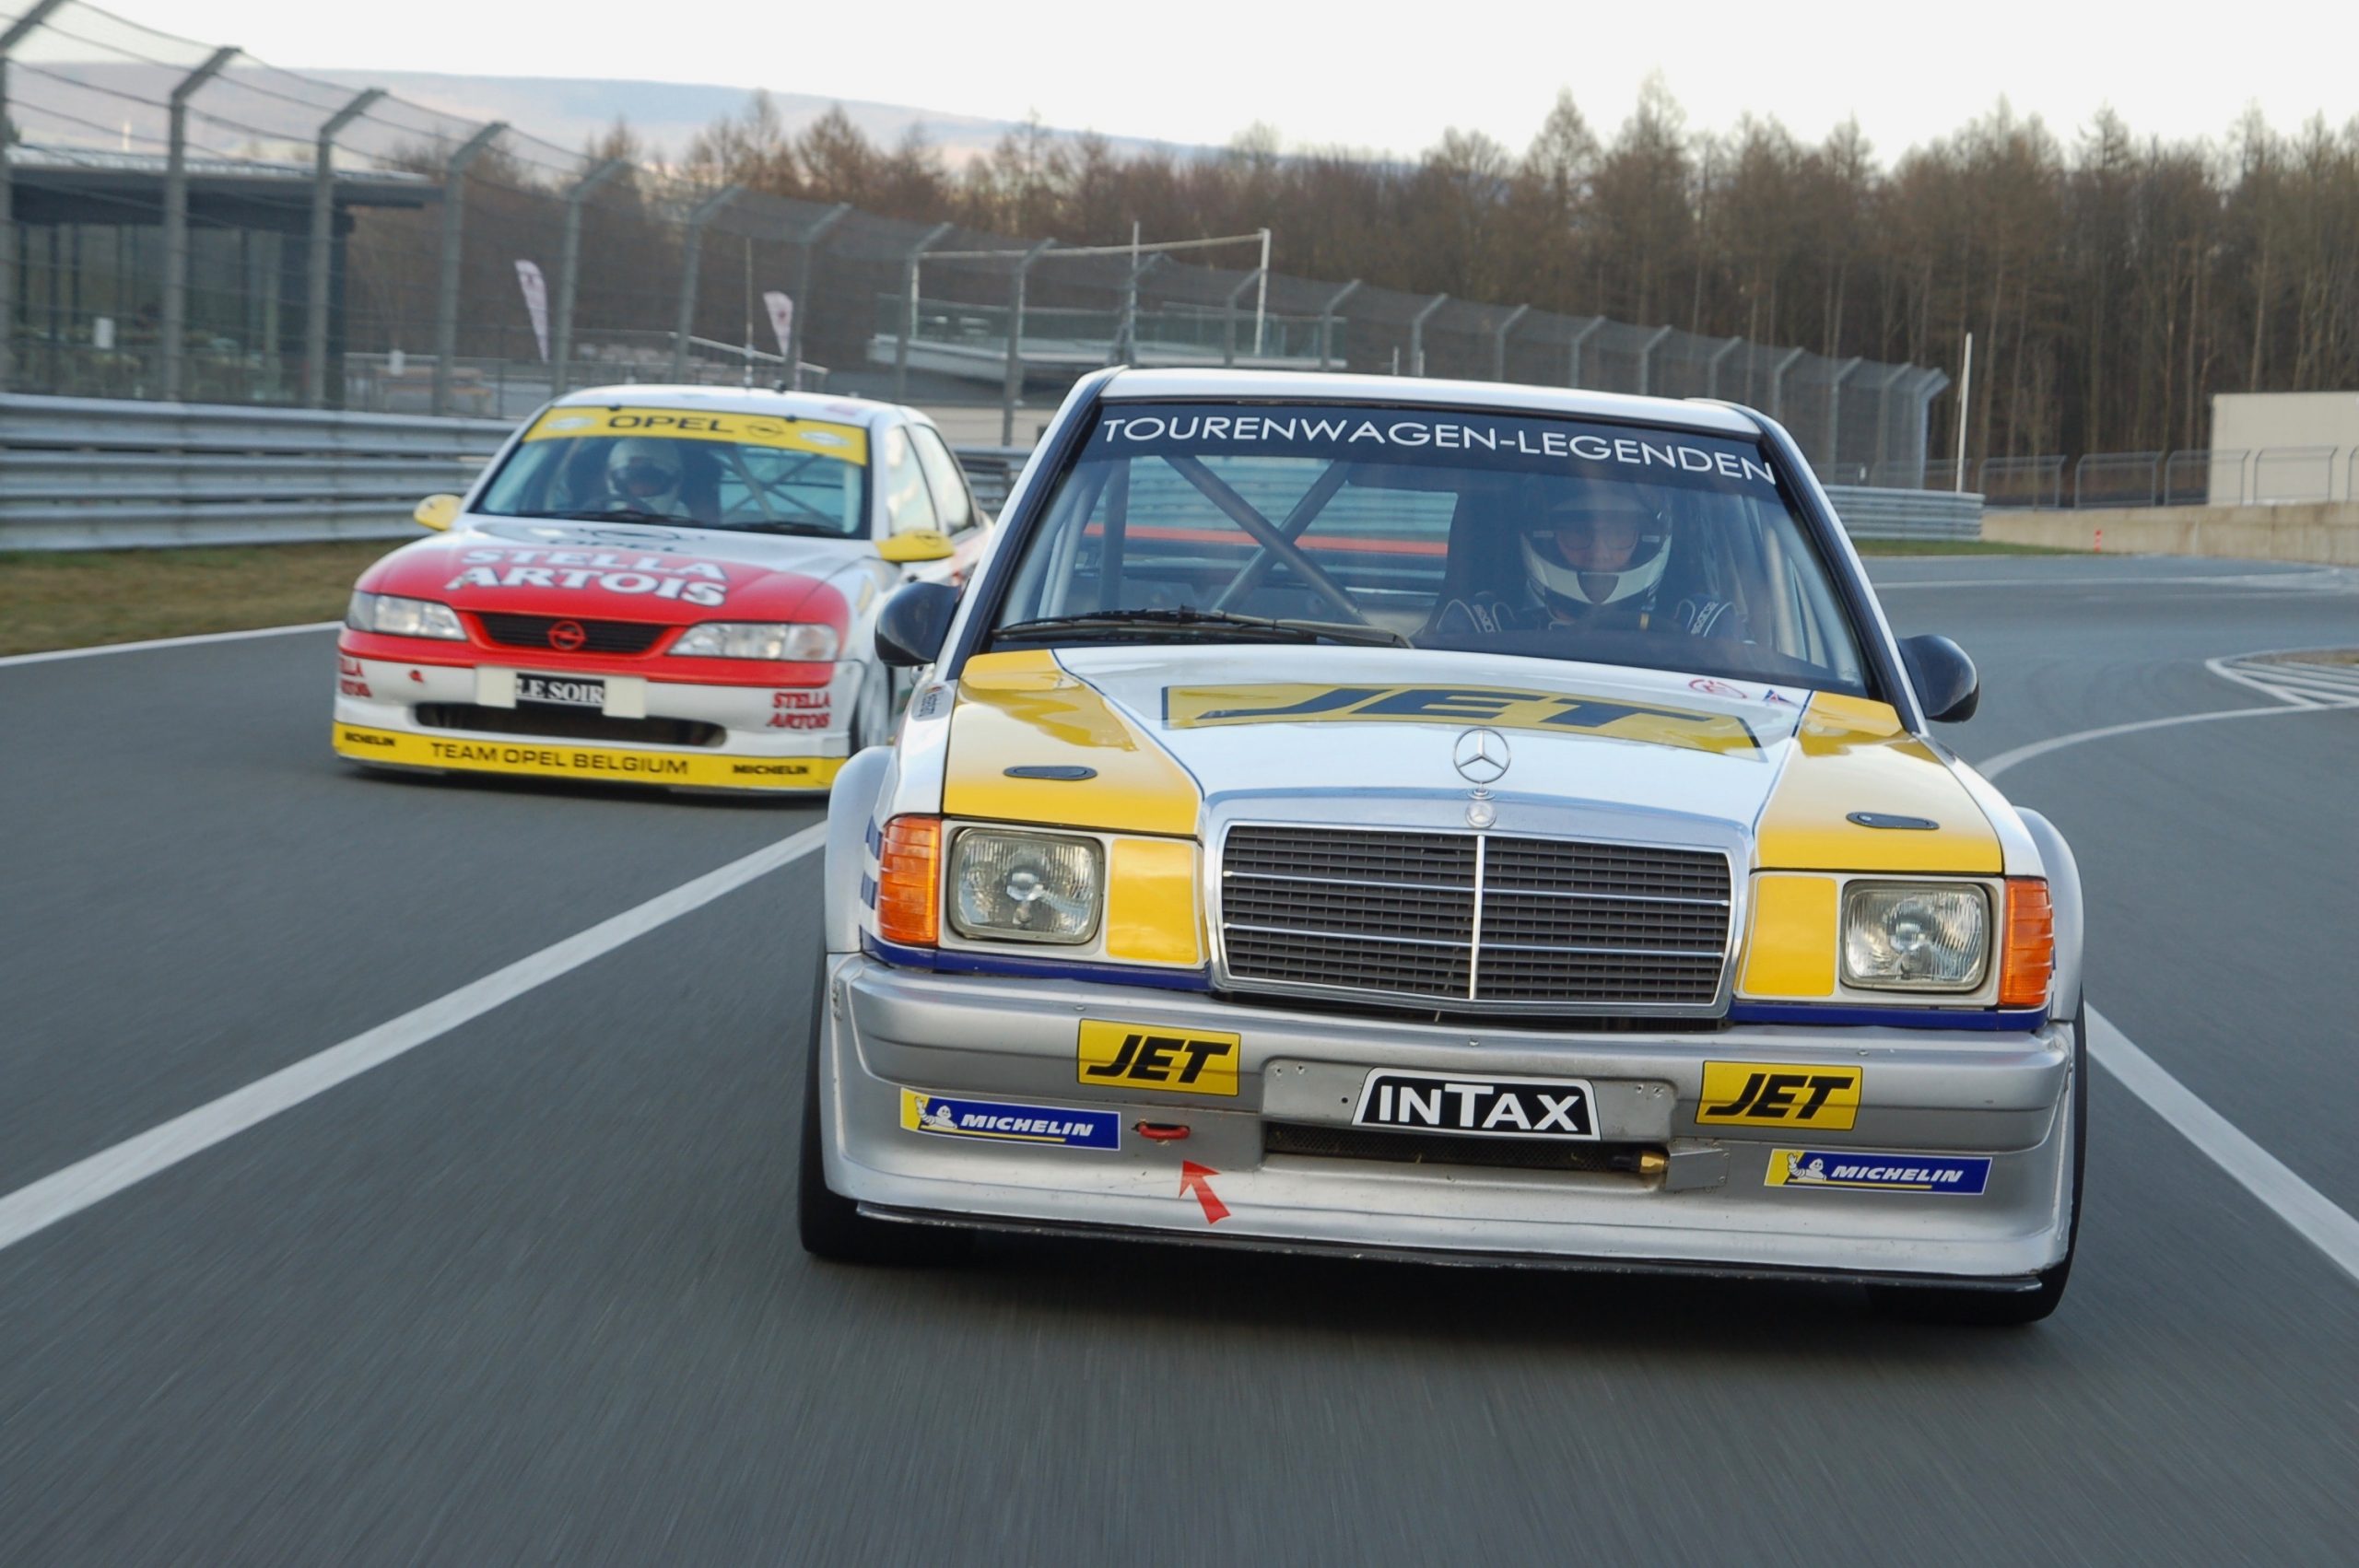 New on offer, newly built, versatile: a classic touring car racer. Mercedes-Benz W 201 (190 E 2.5-16 Evolution), MY 1989, only 502 cars.